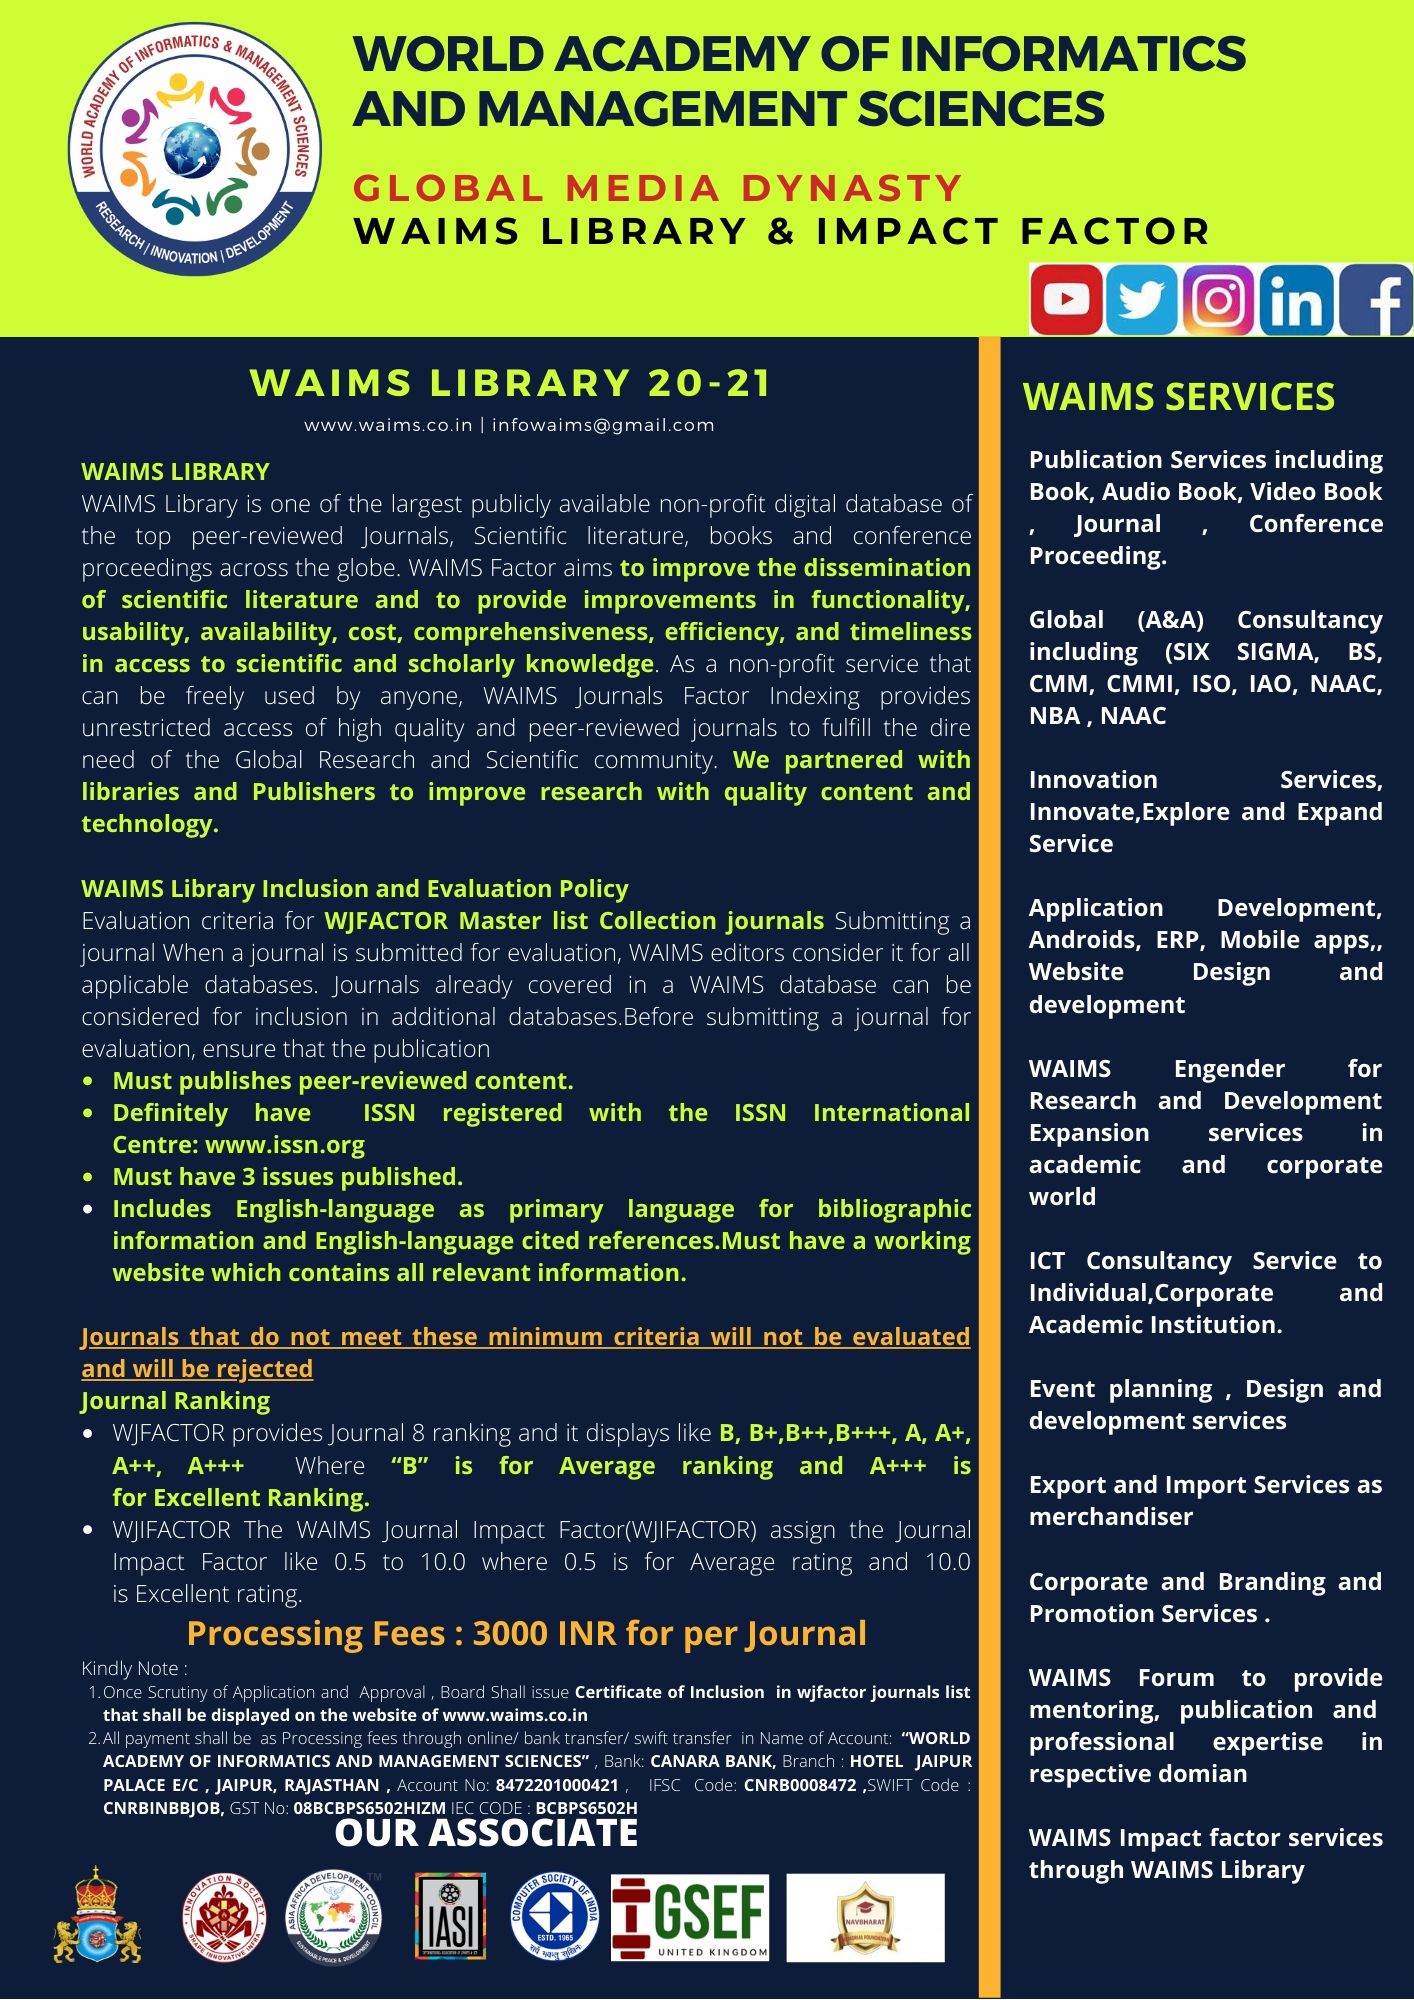 WAIMS Library and Impact Factor Services